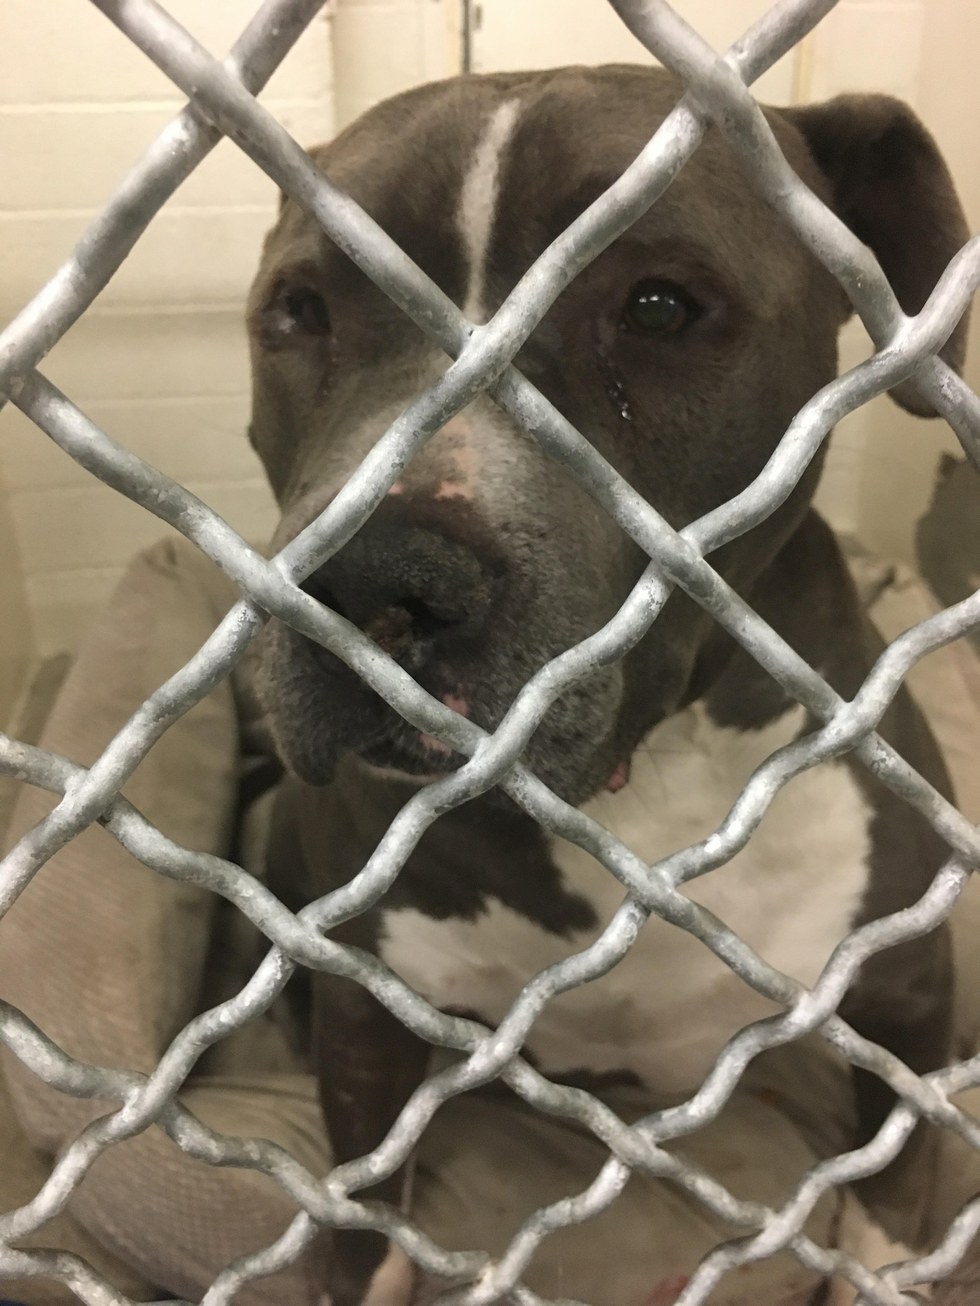 Pit bull crying at the animal shelter